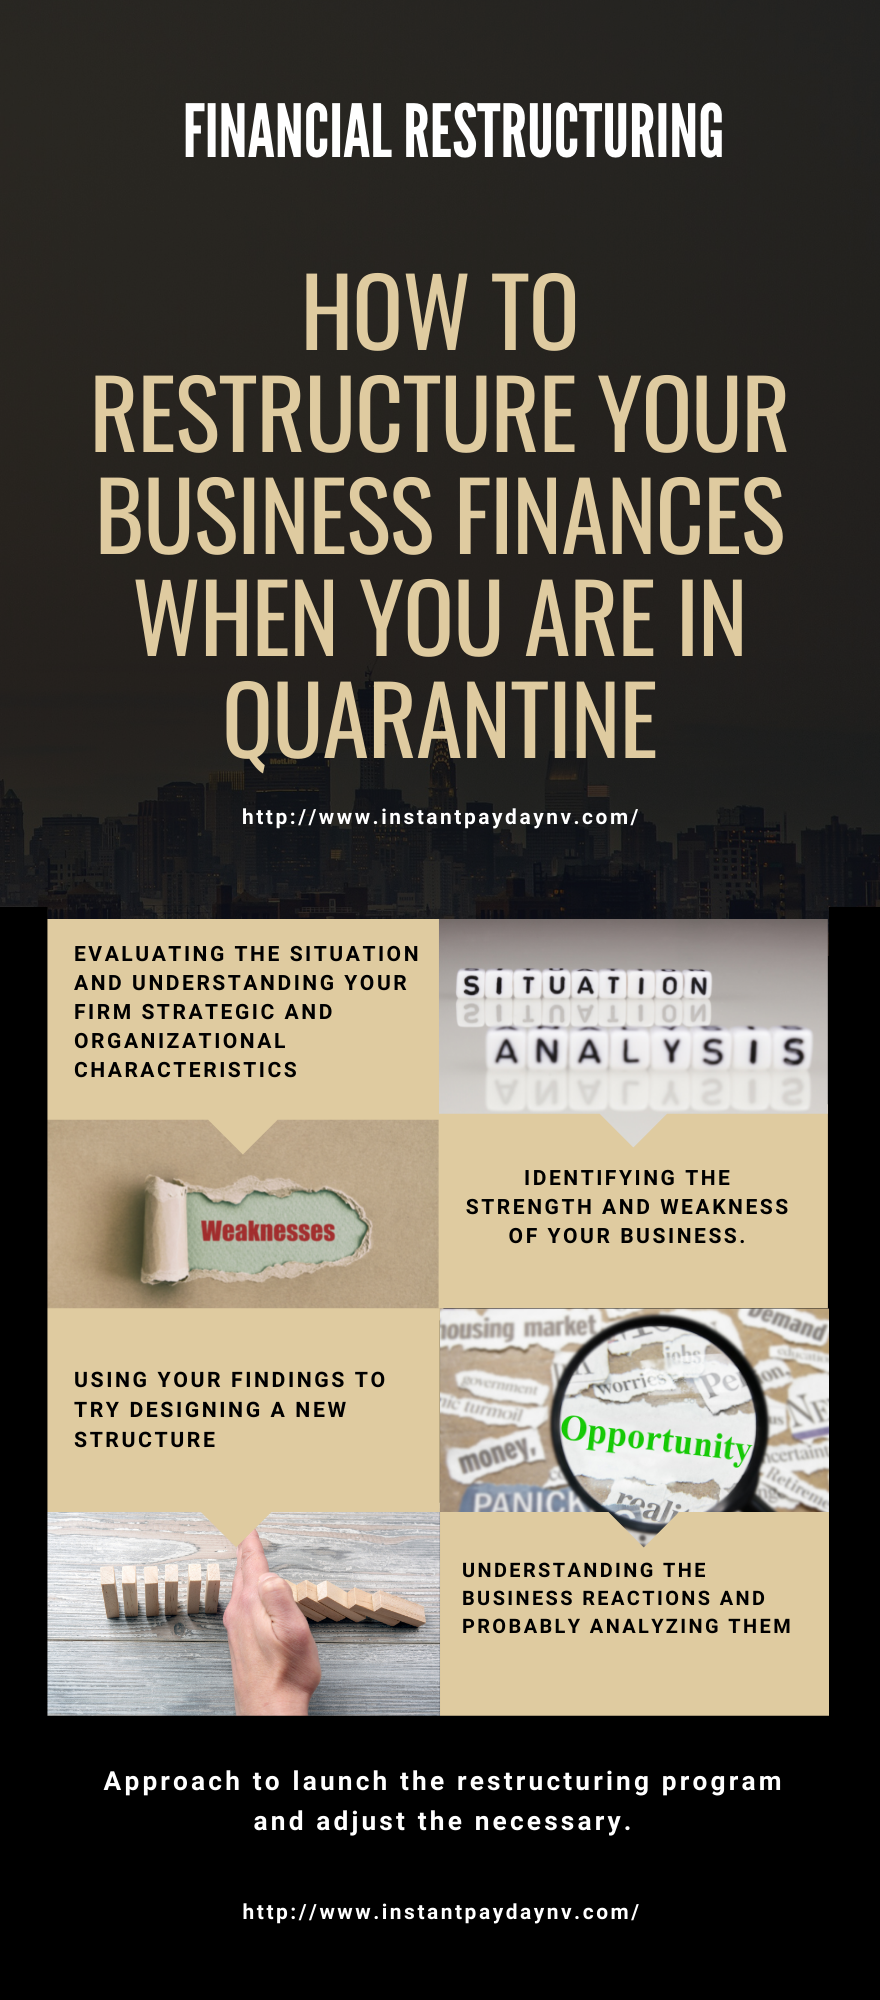 Restructure Your Business Finances When You are in Quarantine